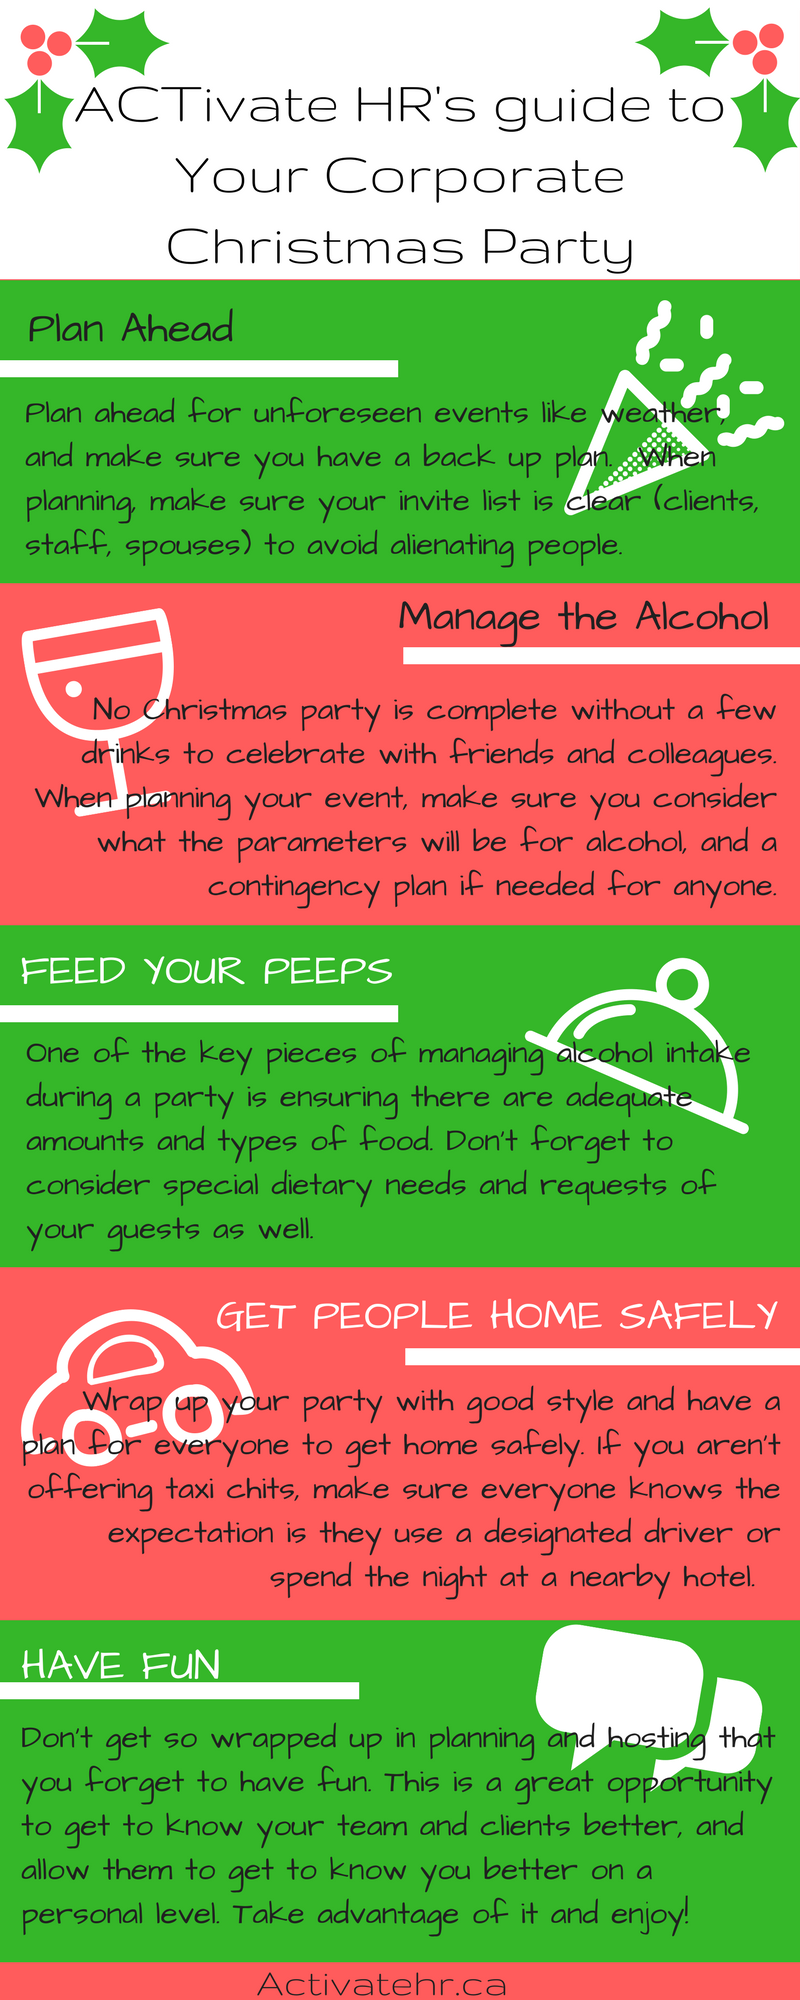 How to Make Your Virtual Christmas Party Safe & Jolly for Everyone